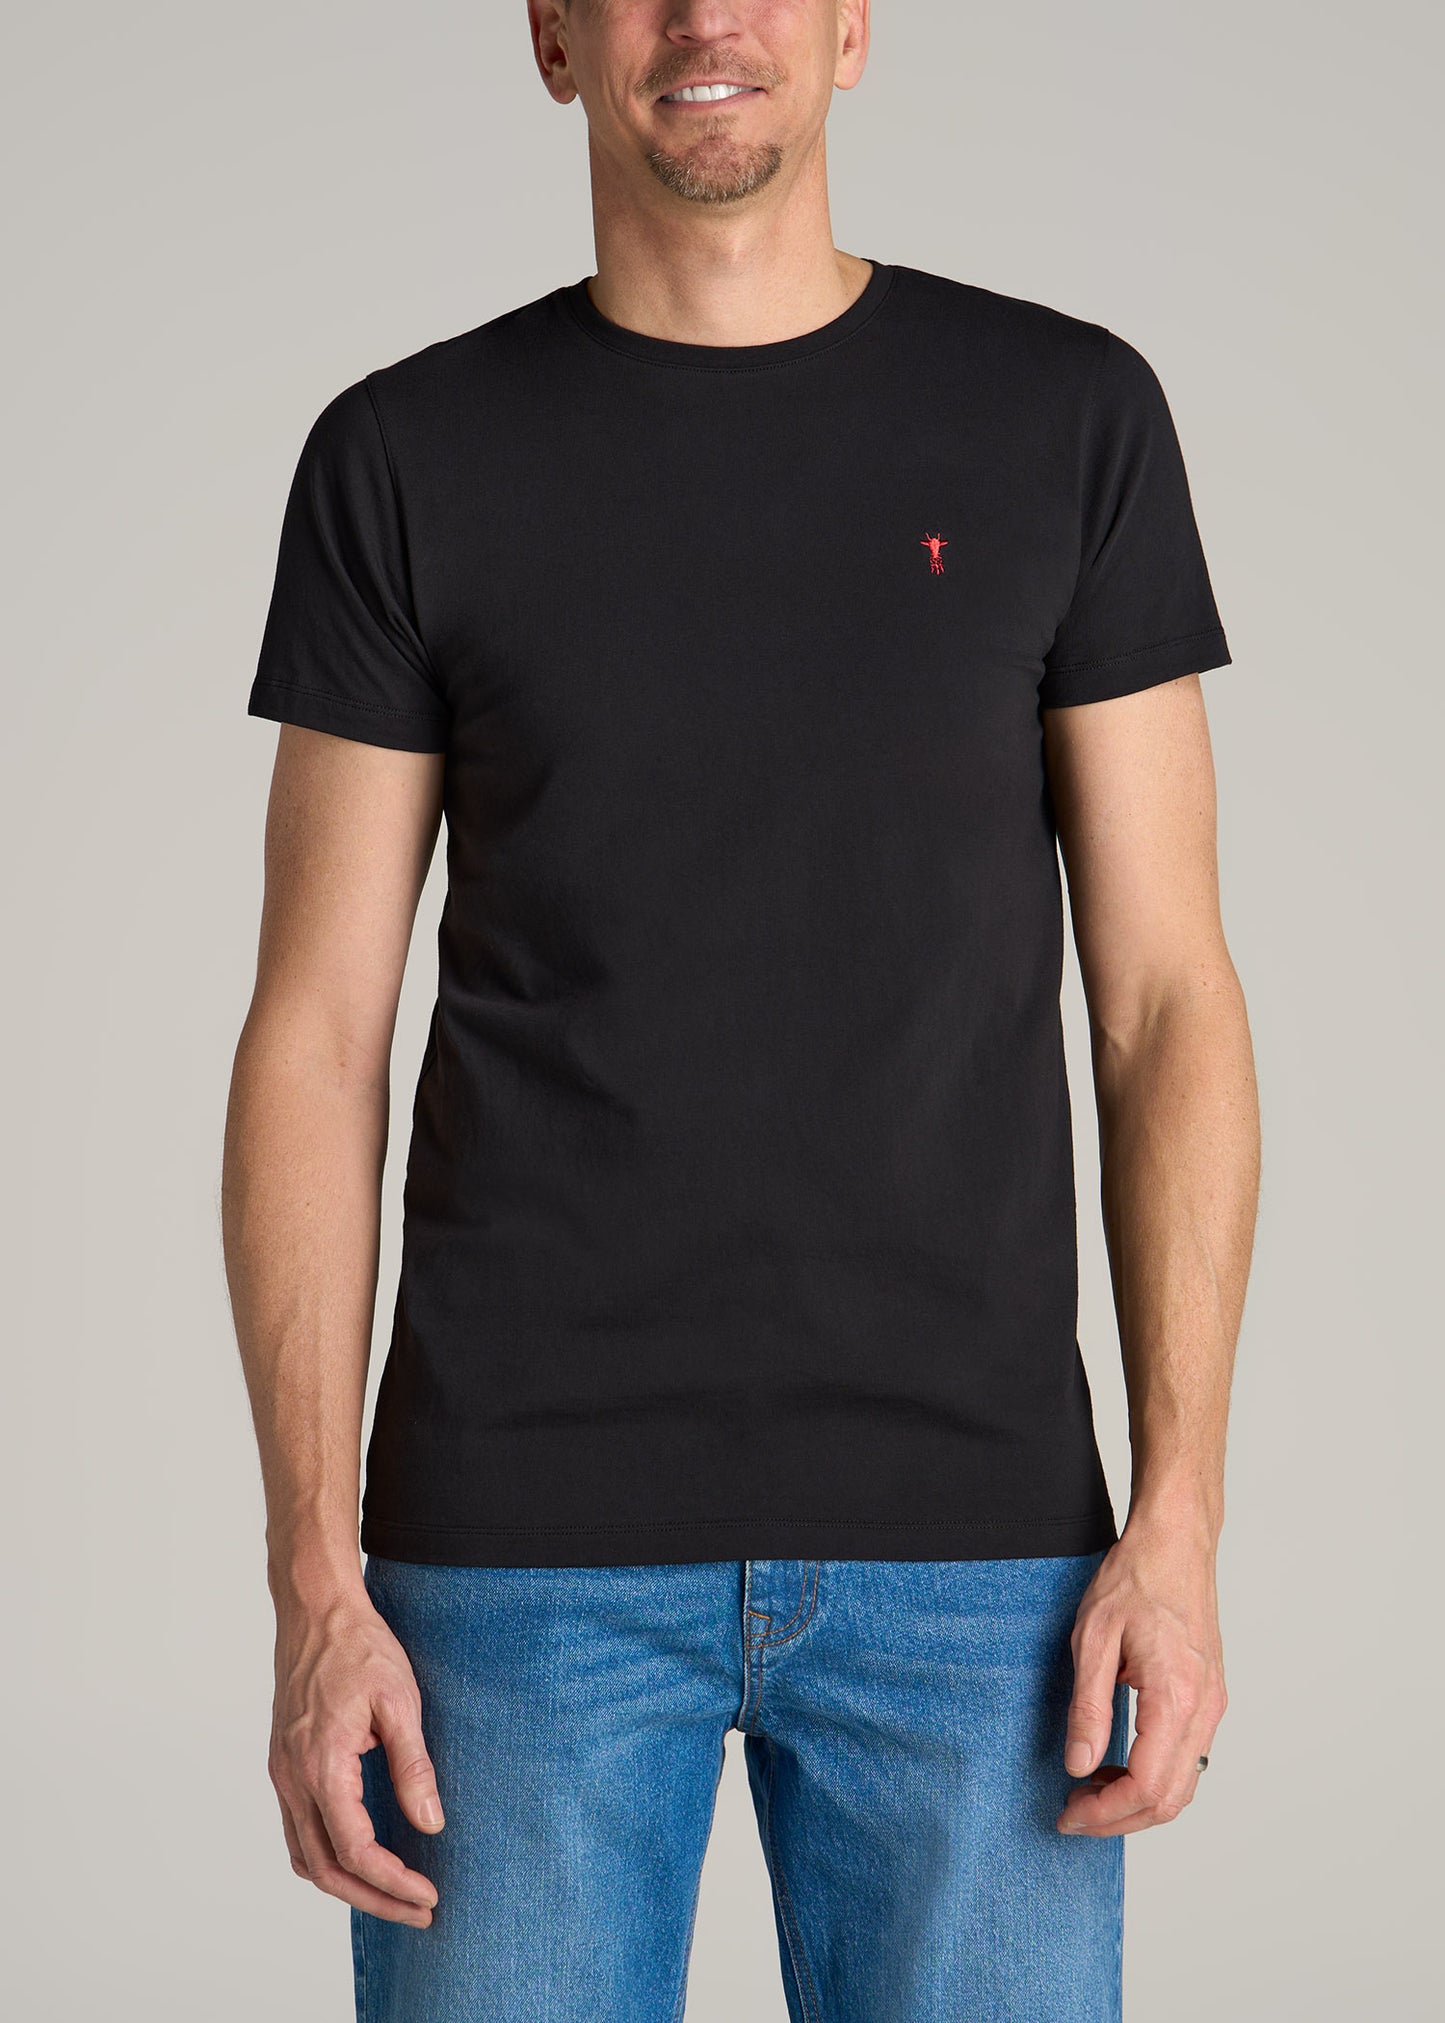 MODERN-FIT Embroidered Logo Crewneck T-Shirt for Tall Men in Black